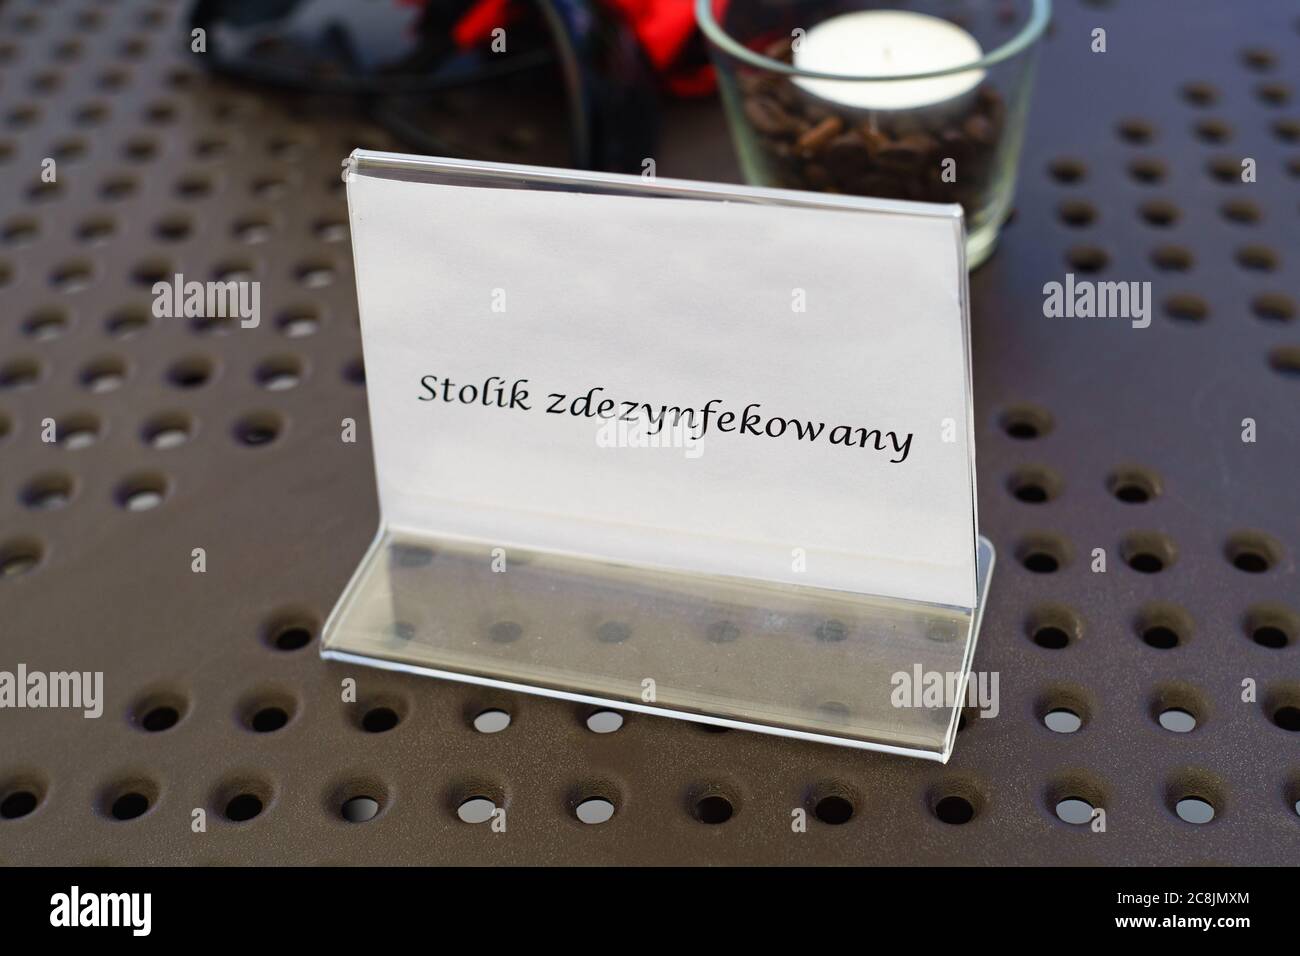 PSZCZYNA, POLAND - Jul 22, 2020: A plate on the table in a Polish restaurant with the words 'disinfected table'. Stock Photo